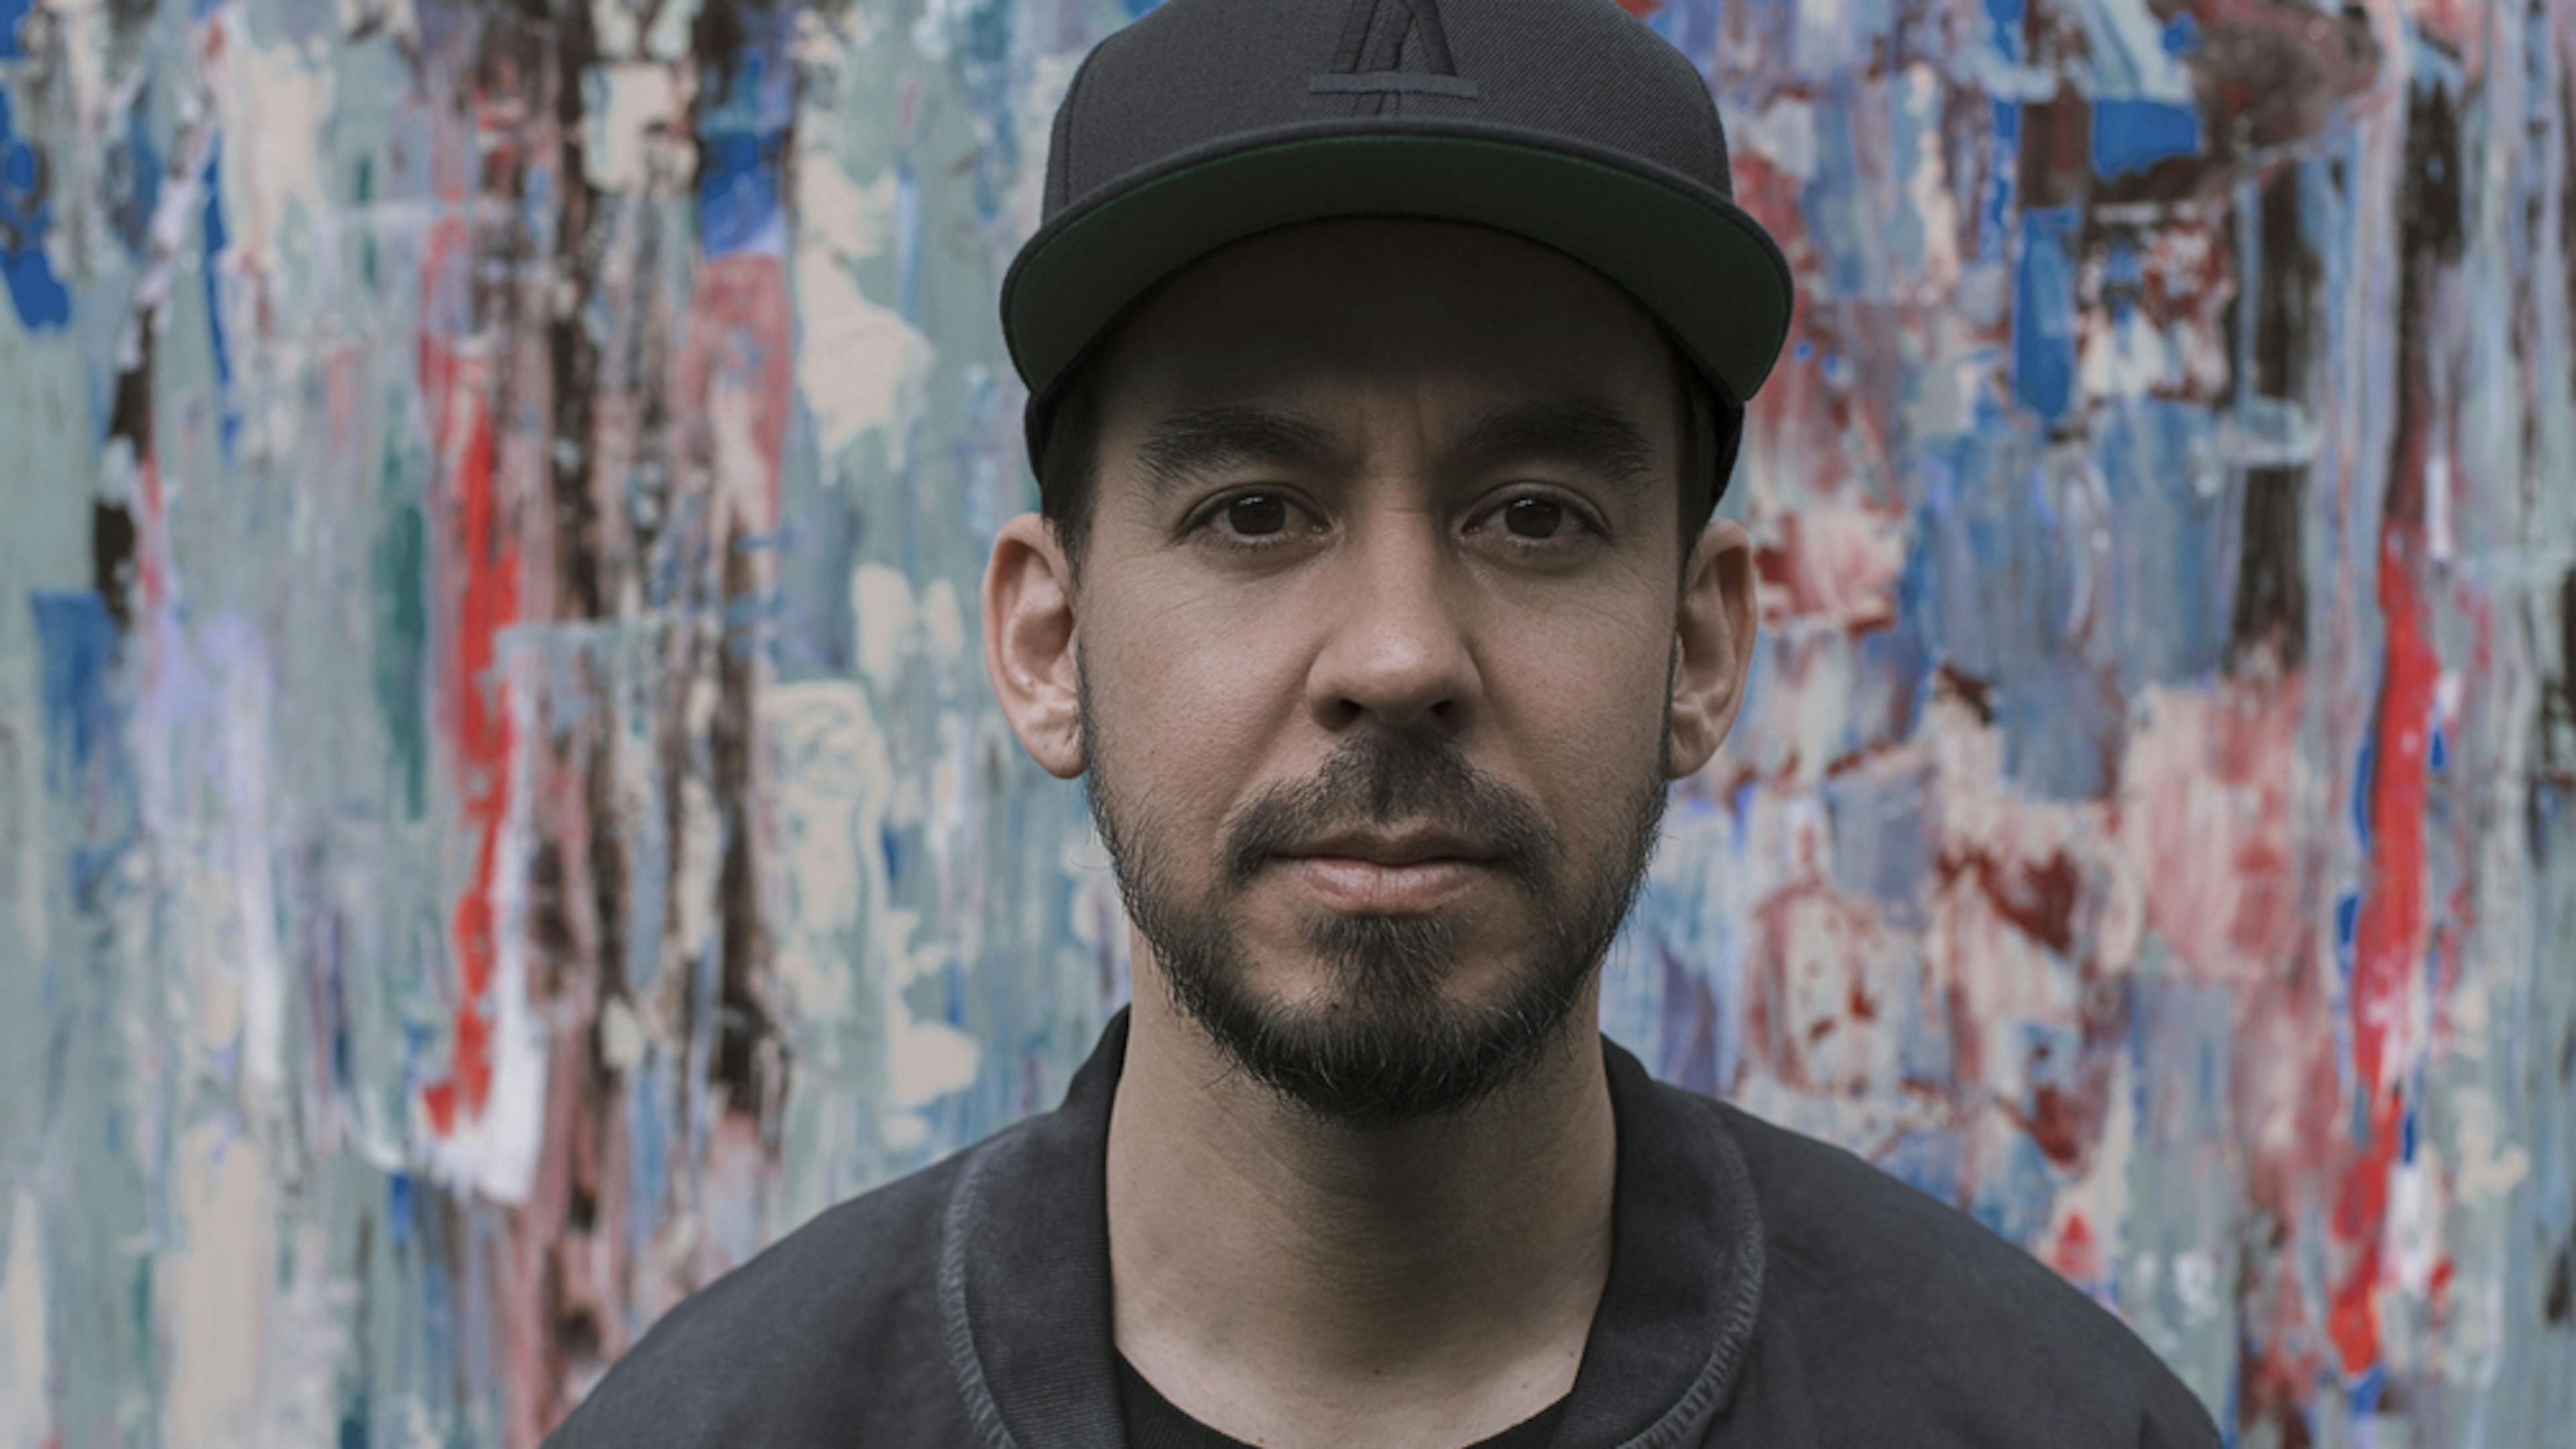 Mike Shinoda has released the music from his NFT mixtape